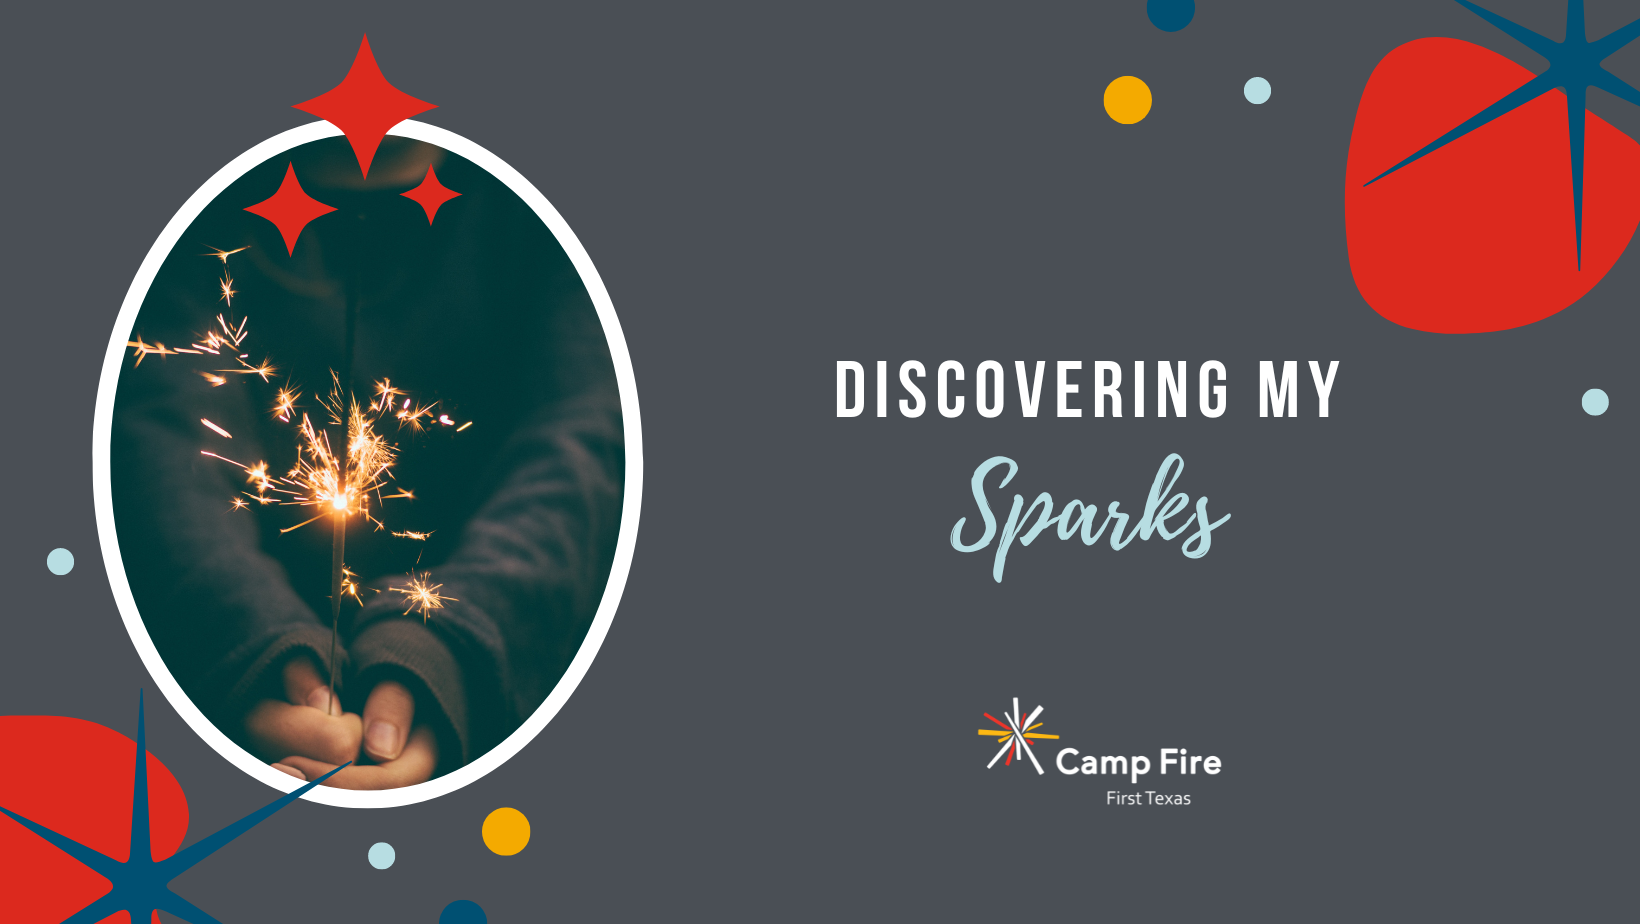 Discovering My Sparks, a Camp Fire First Texas blog by Jan Katchmazenski